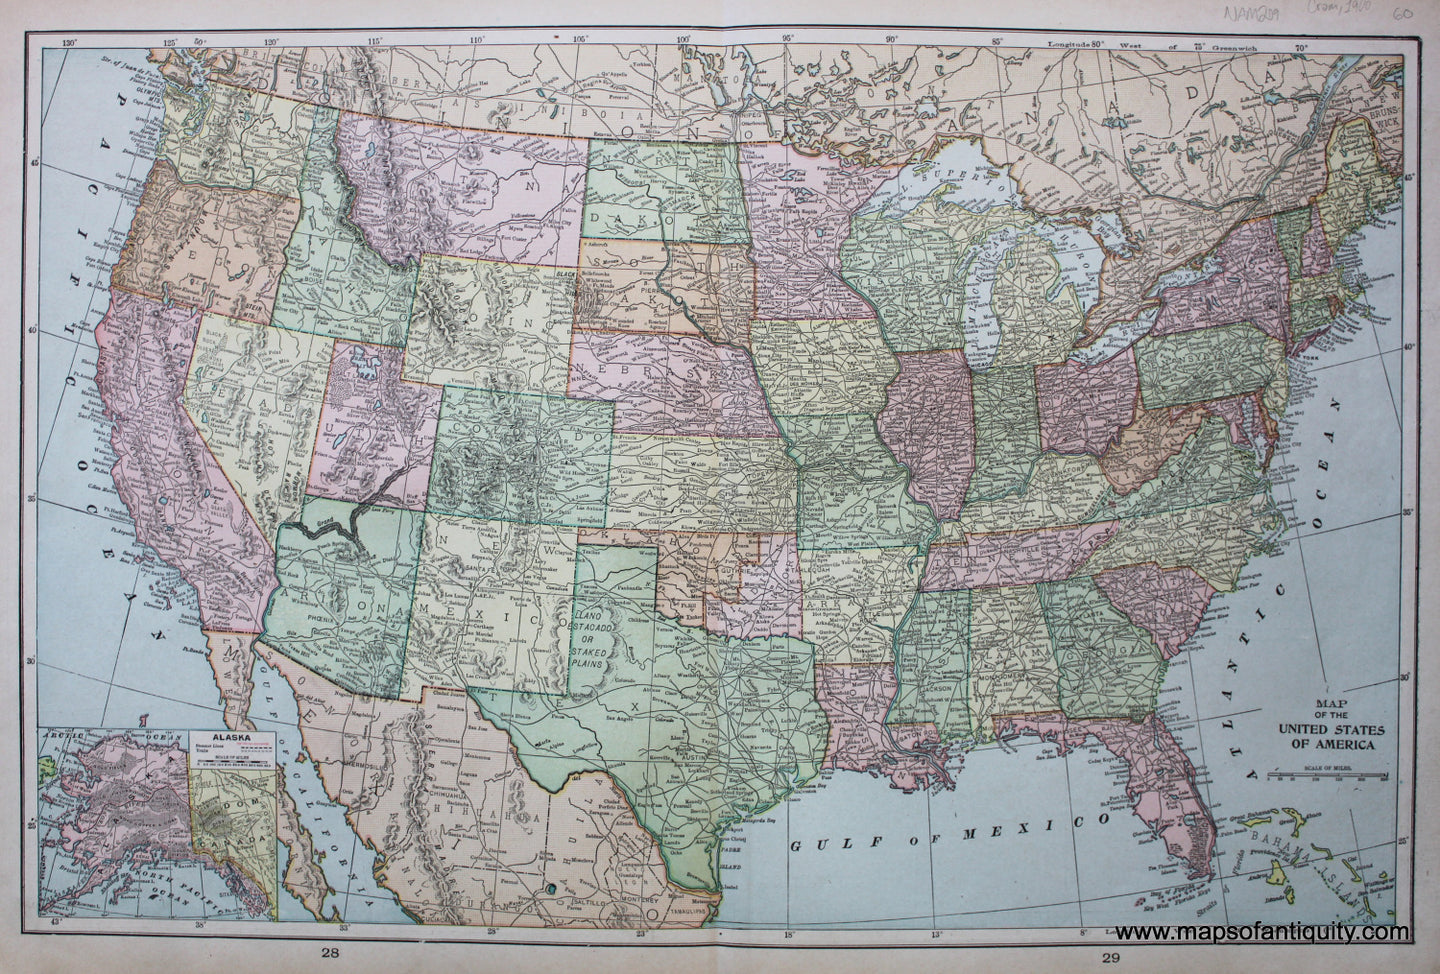 Antique-Printed-Color-Map-Map-of-The-United-States-of-America-verso:-British-Columbia-and-Maine-North-America-Canada-North-America-General-Maine-1900-Cram-Maps-Of-Antiquity